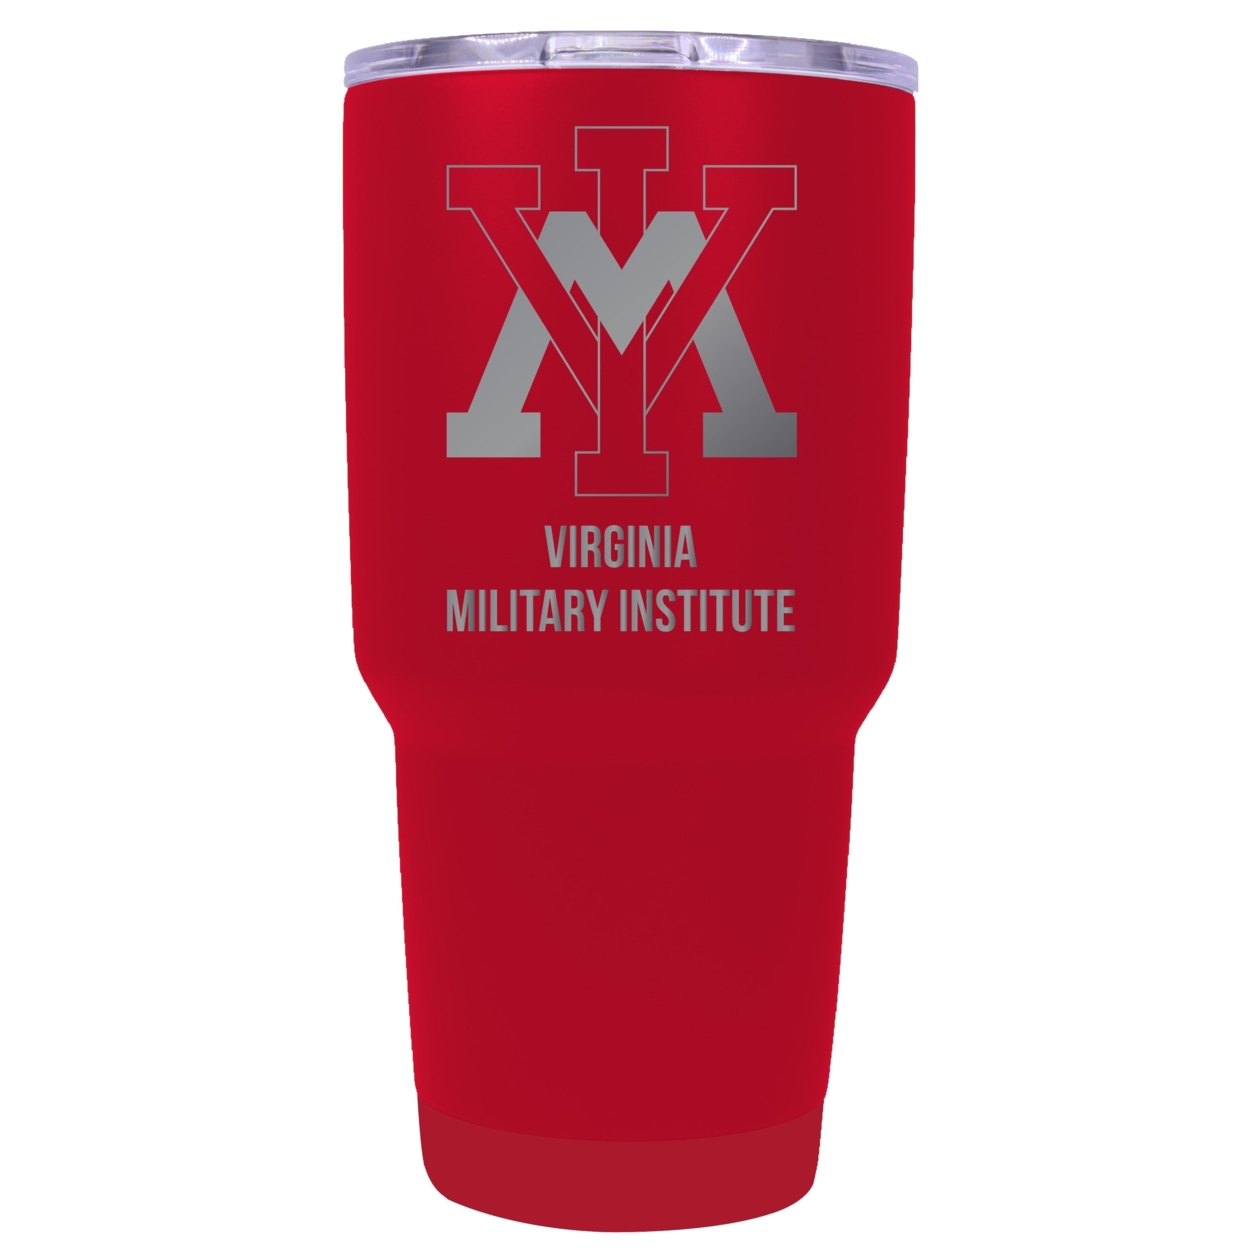 VMI Keydets 24 Oz Laser Engraved Stainless Steel Insulated Tumbler - Choose Your Color. - Navy